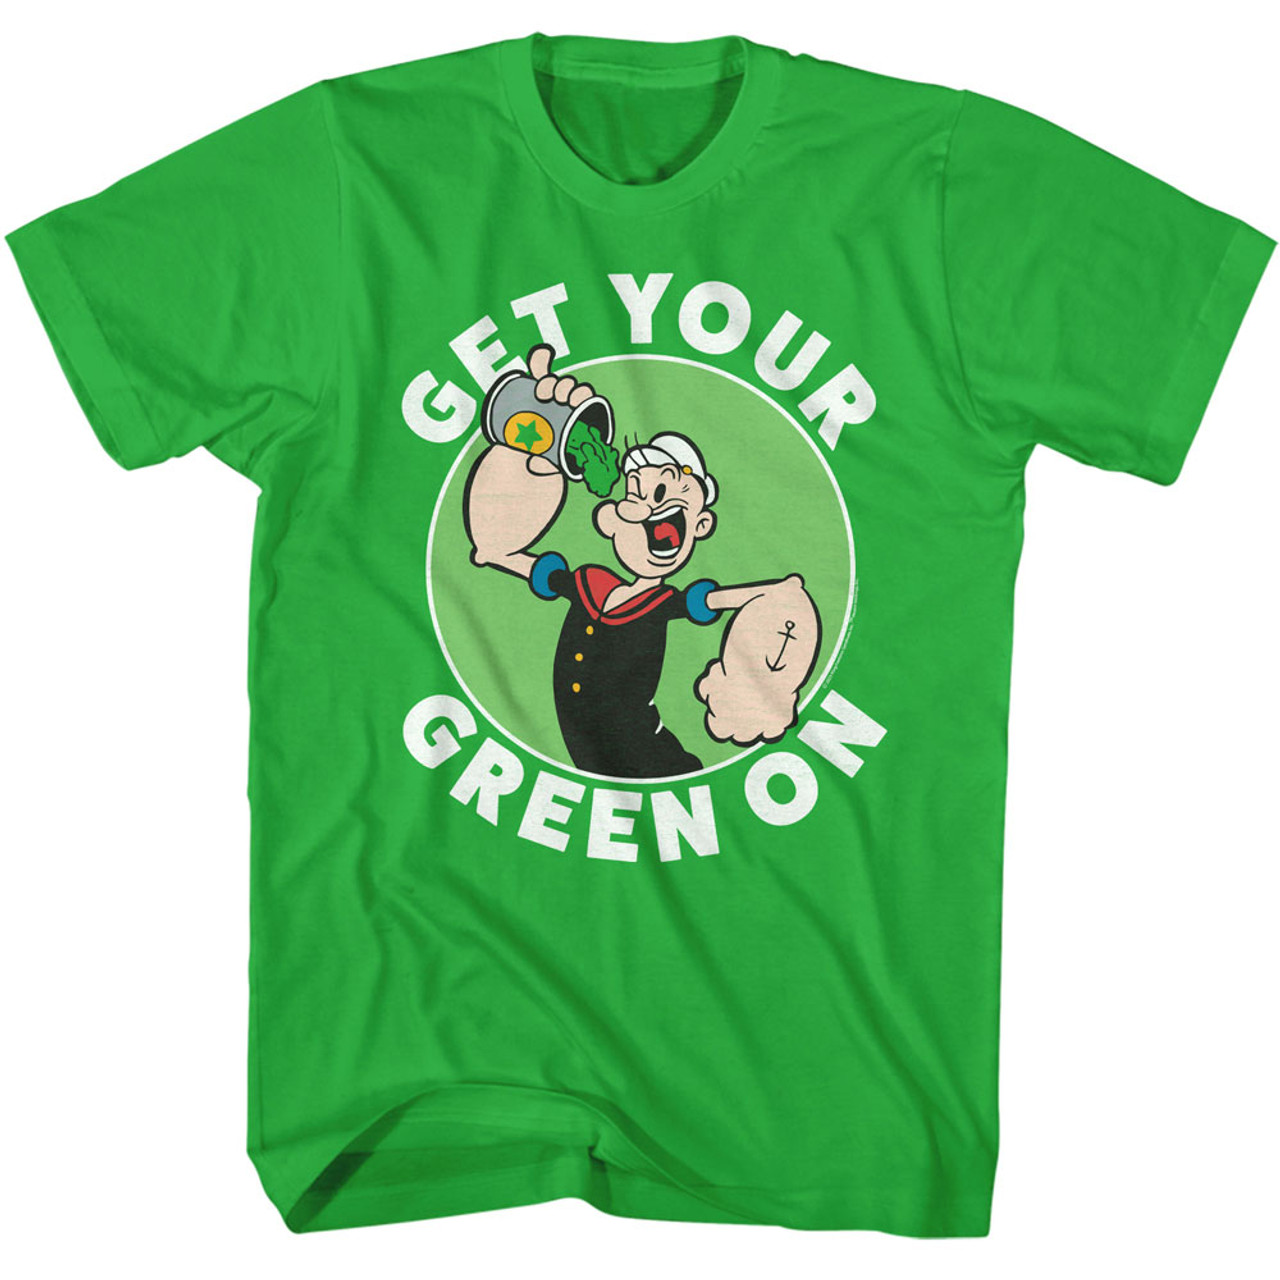 Popeye Get Your Green On T-Shirt - Old School Tees